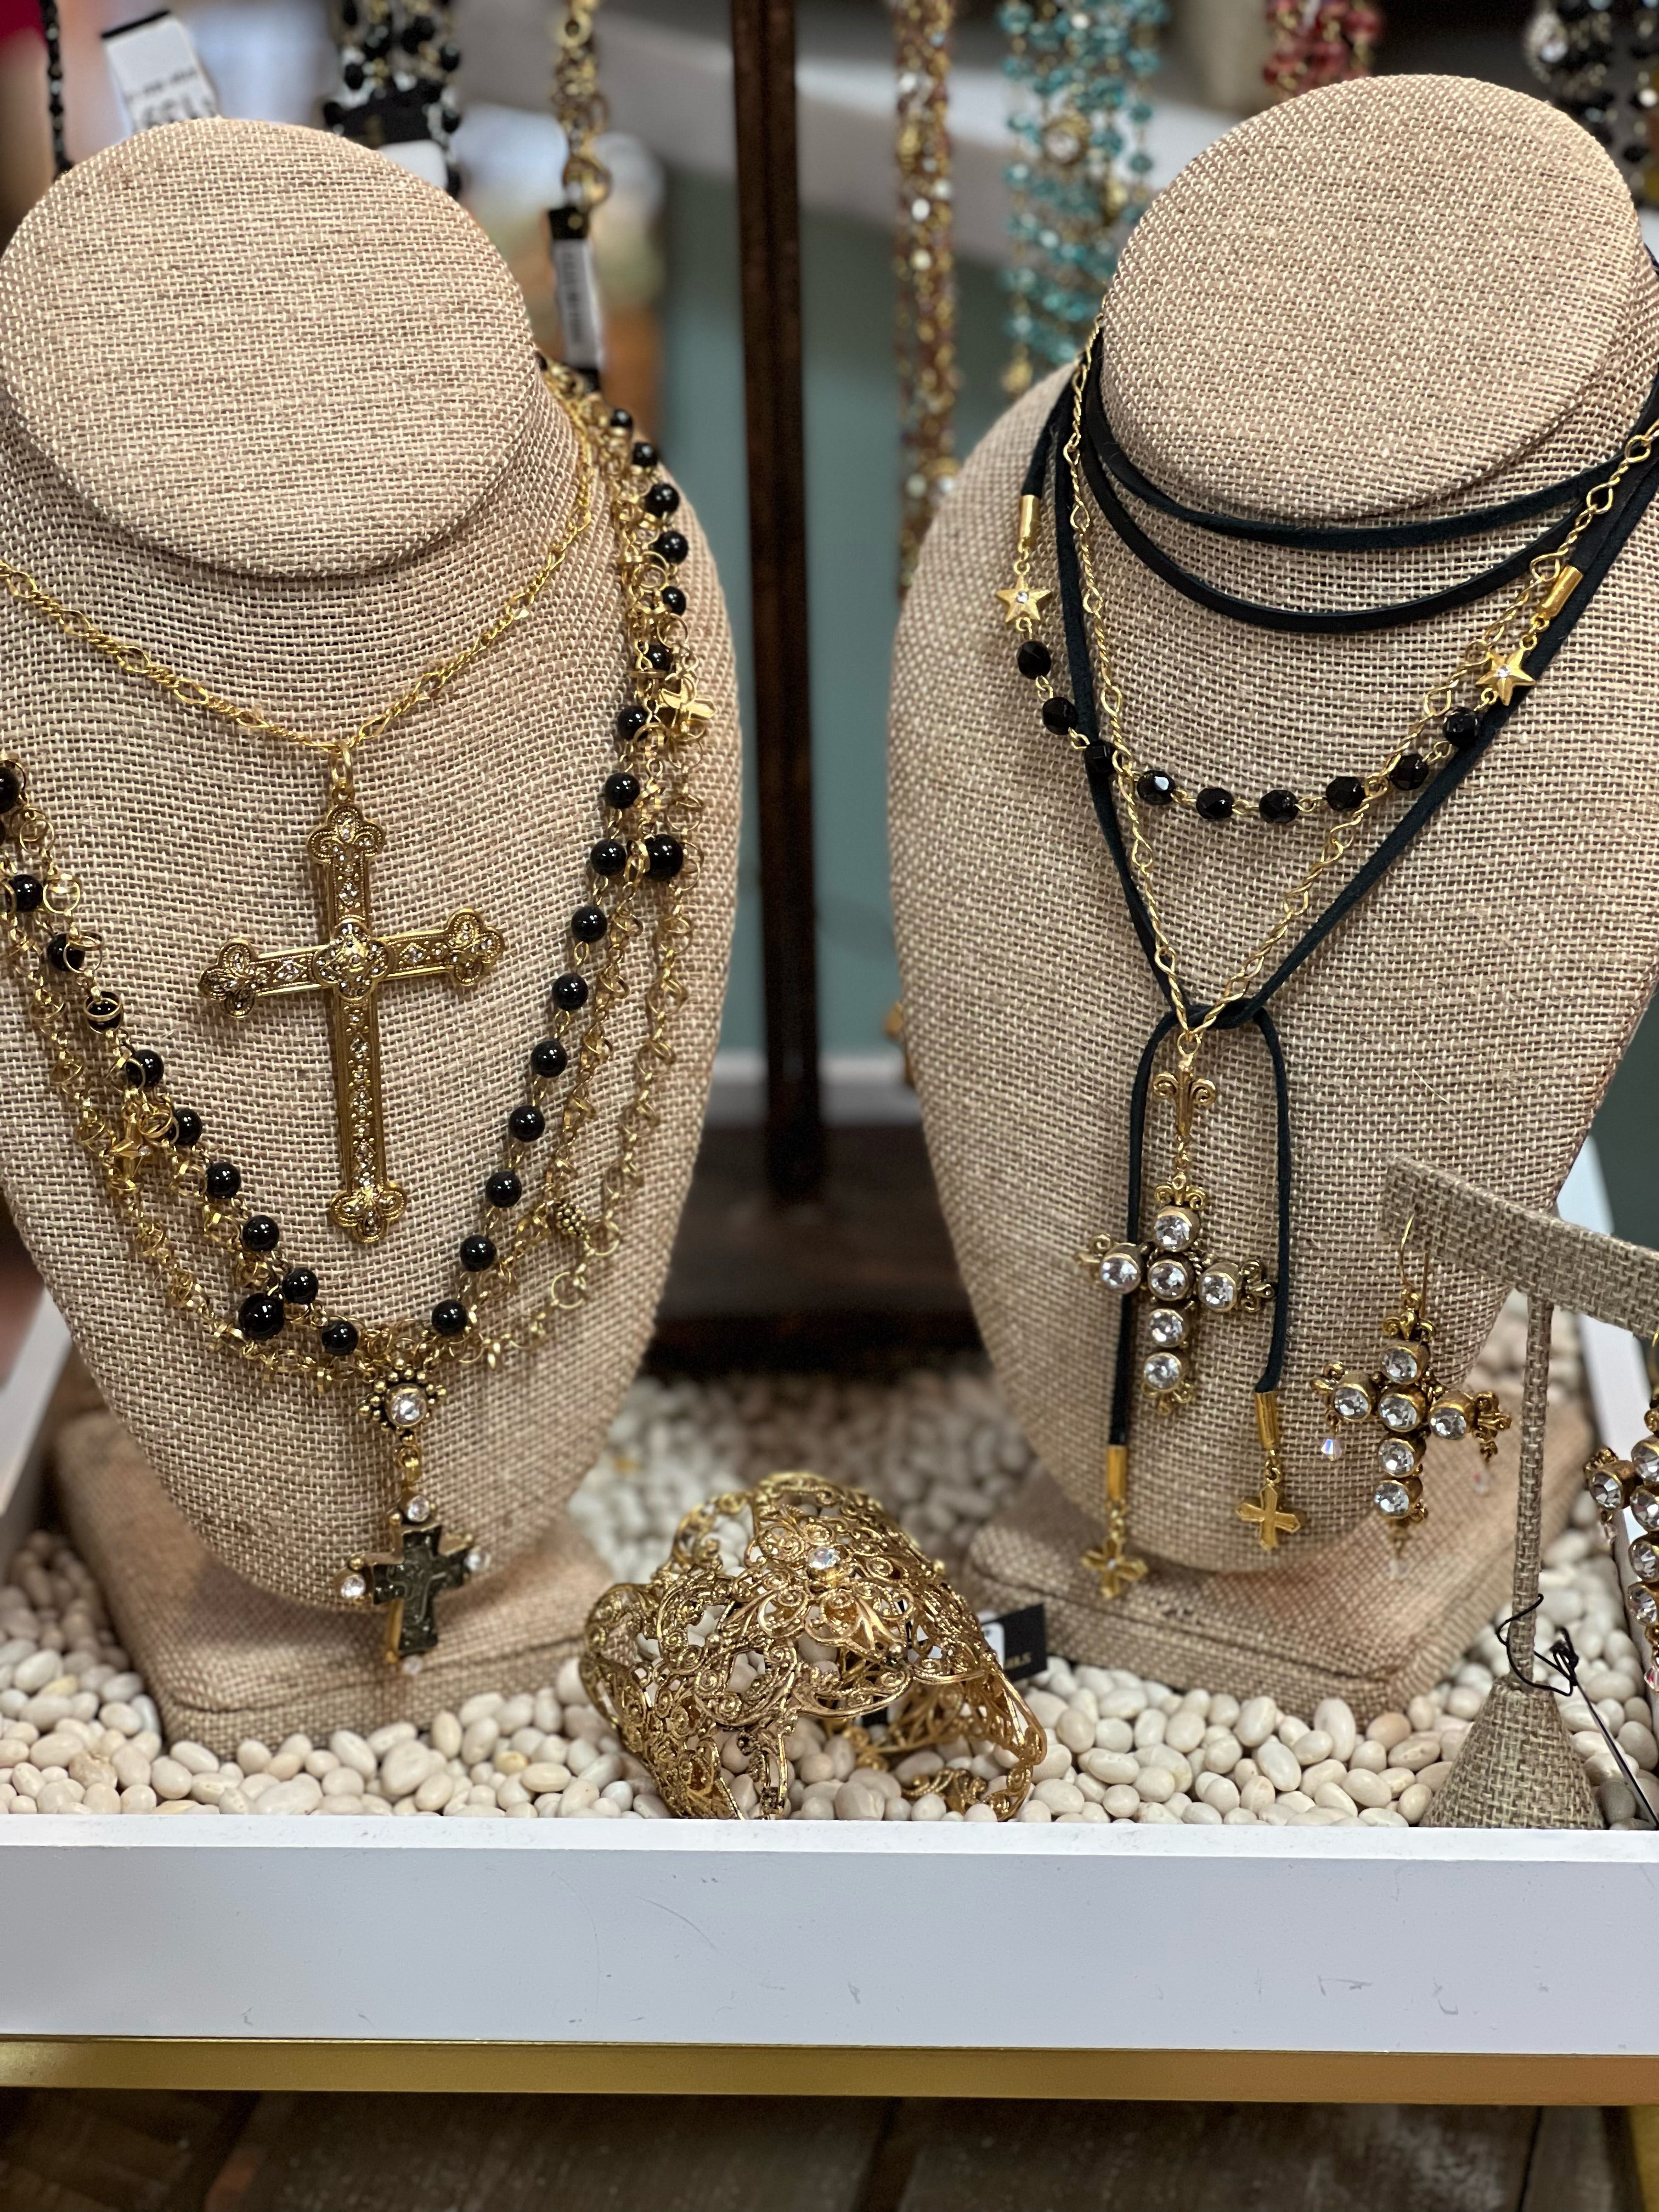 Black Beads and Cross Necklaces